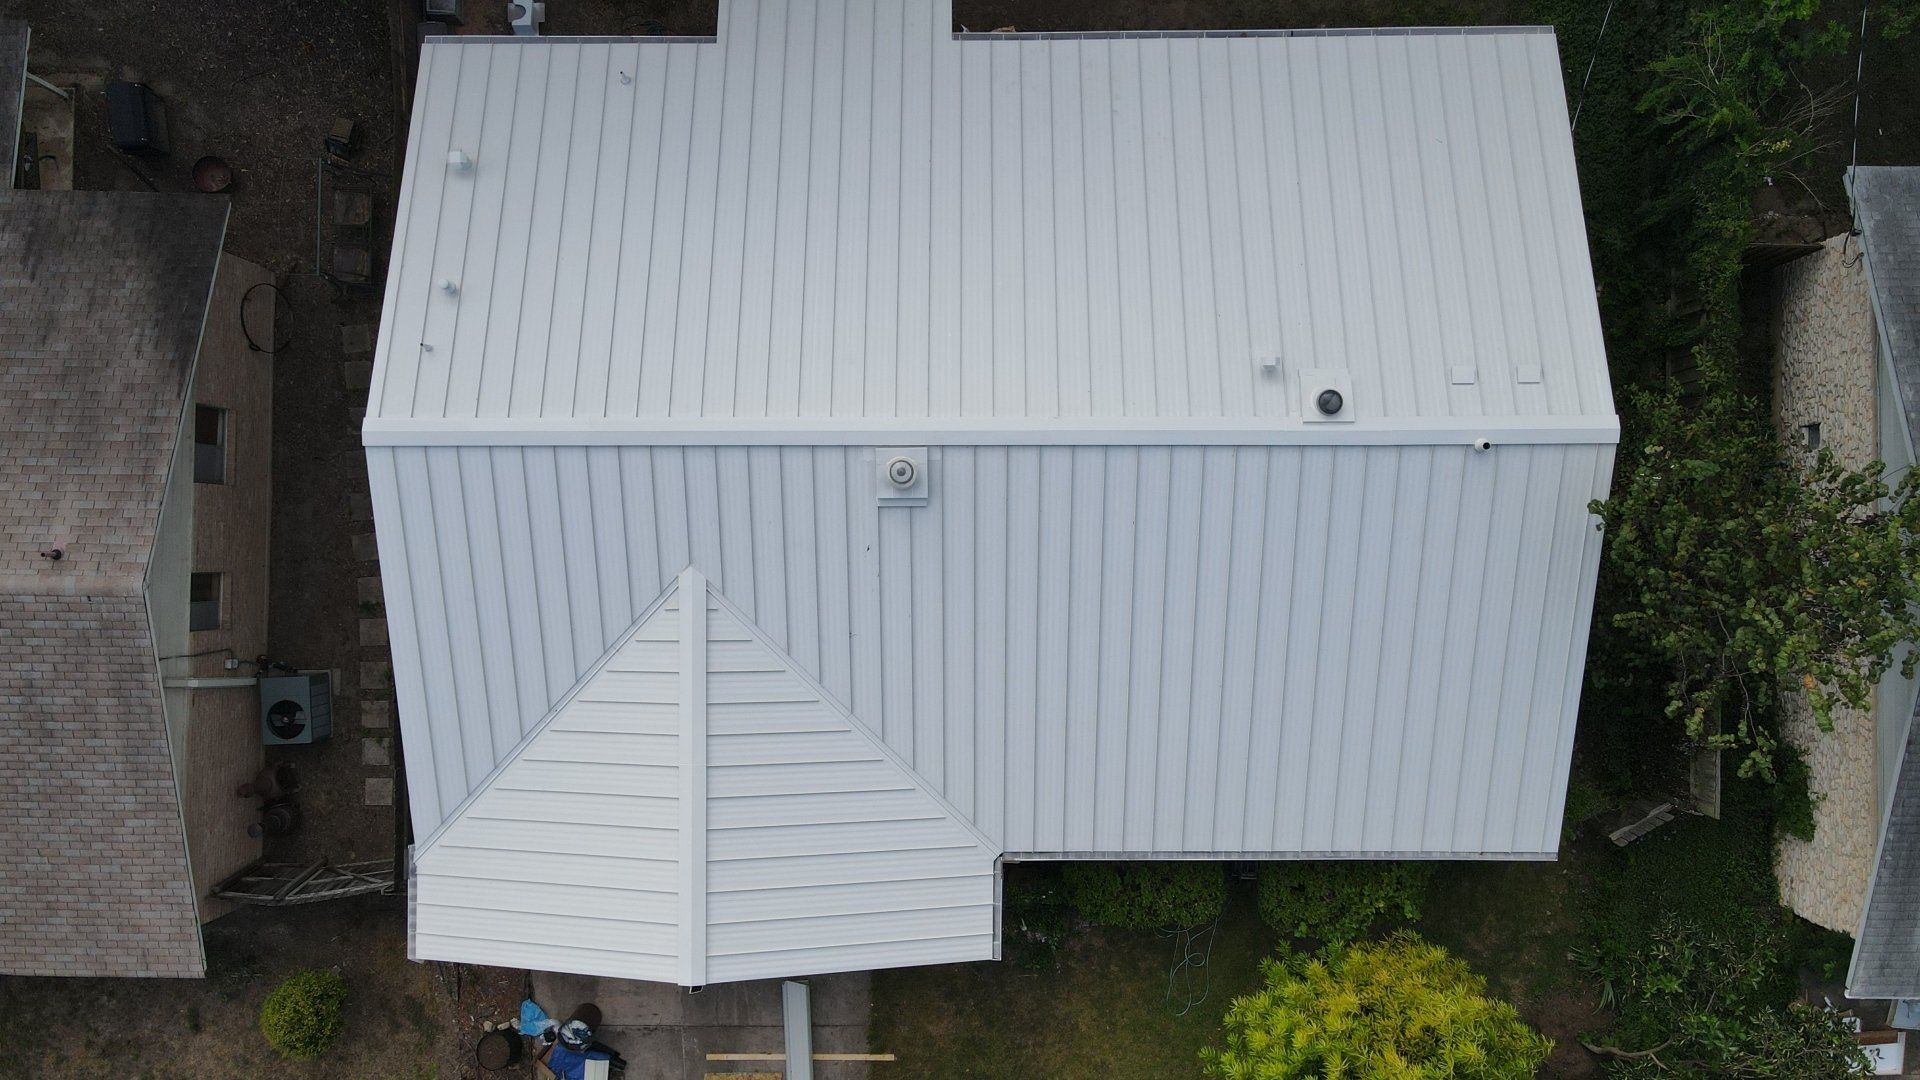 An aerial view of a white house with a metal roof.